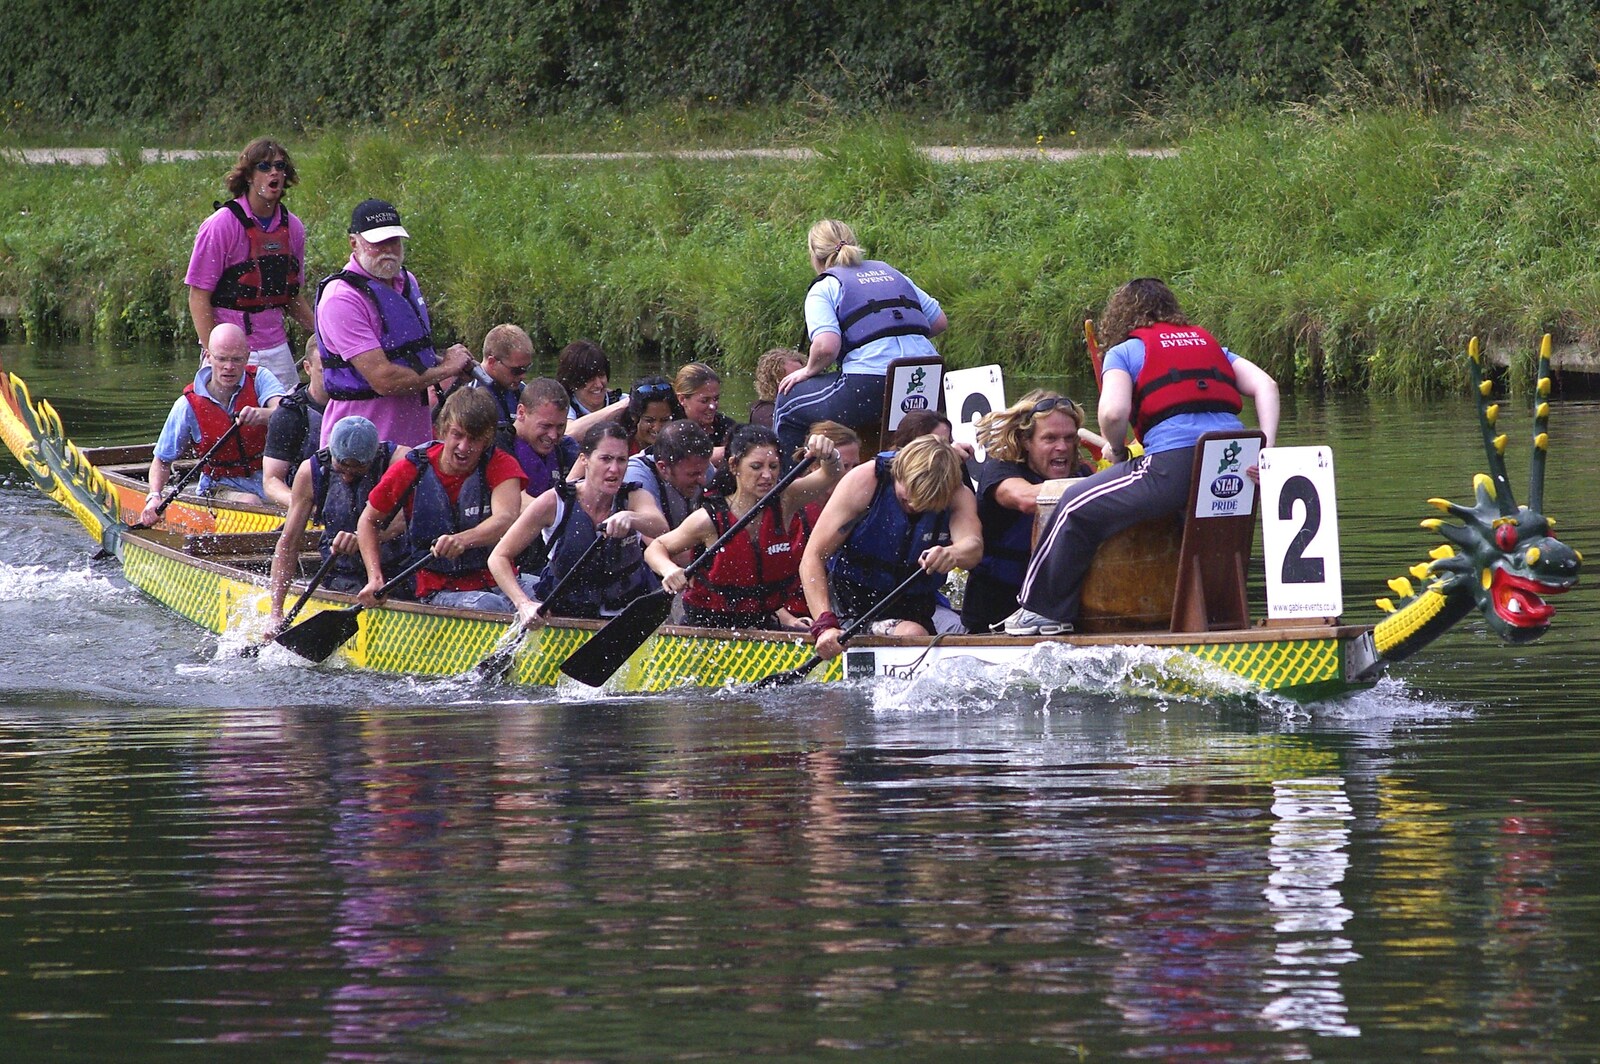 Qualcomm's Dragon-Boat Racing, Fen Ditton, Cambridge - 8th September 2007: A tream paddles furiously